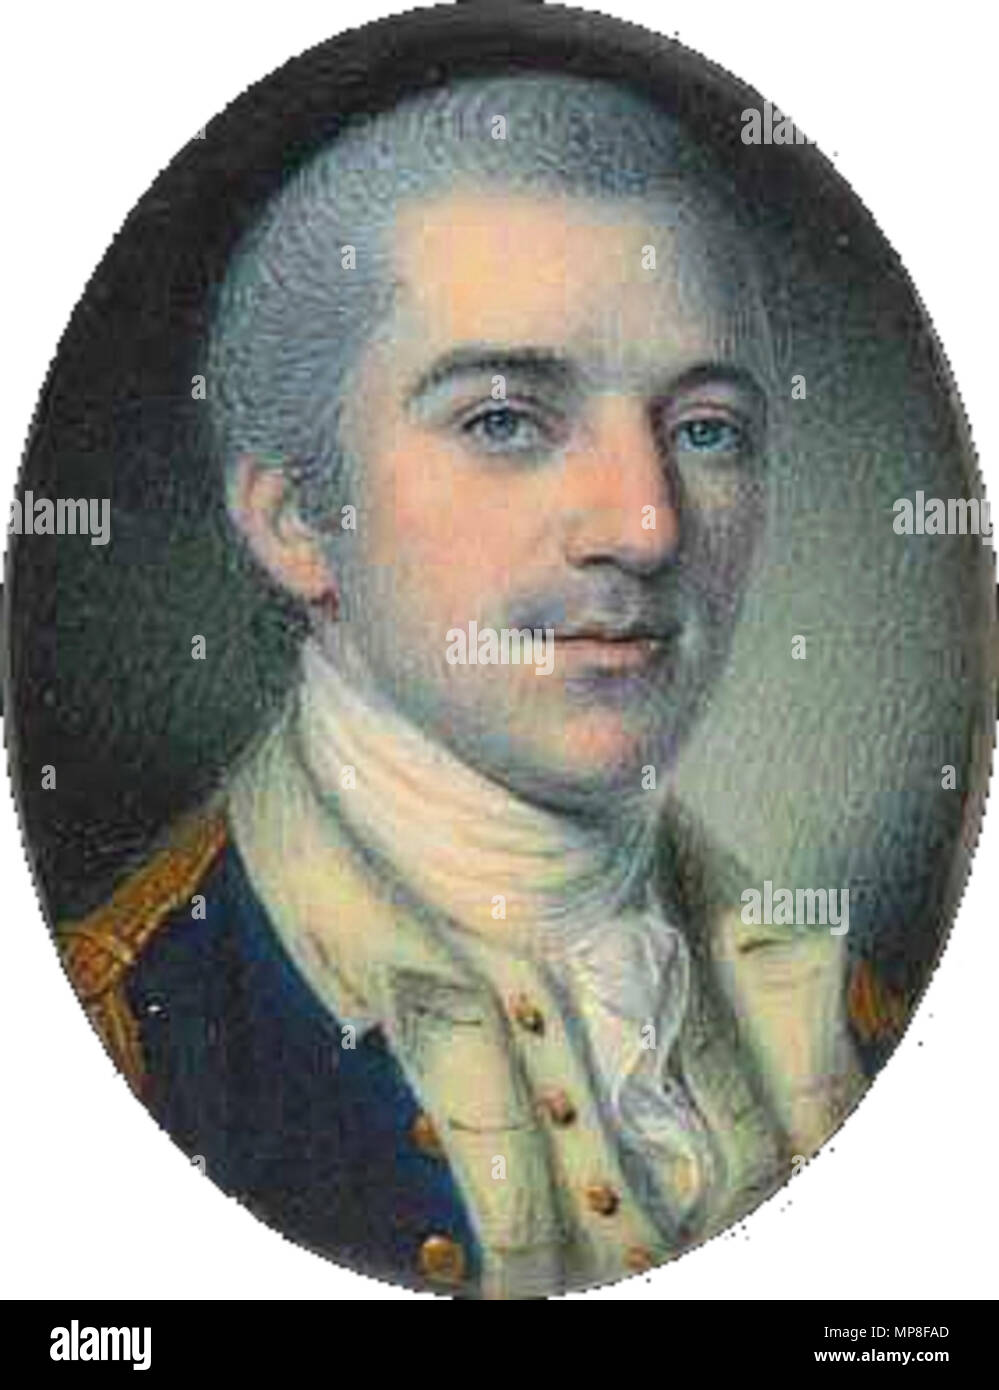 .  English: Portrait of American Revolutionary War soldier and statesman John Laurens. Original image has been cropped and edited to remove potentially copyrightable elements (frame). . circa 1780.   733 John Laurens (1780), by Charles Willson Peale Stock Photo